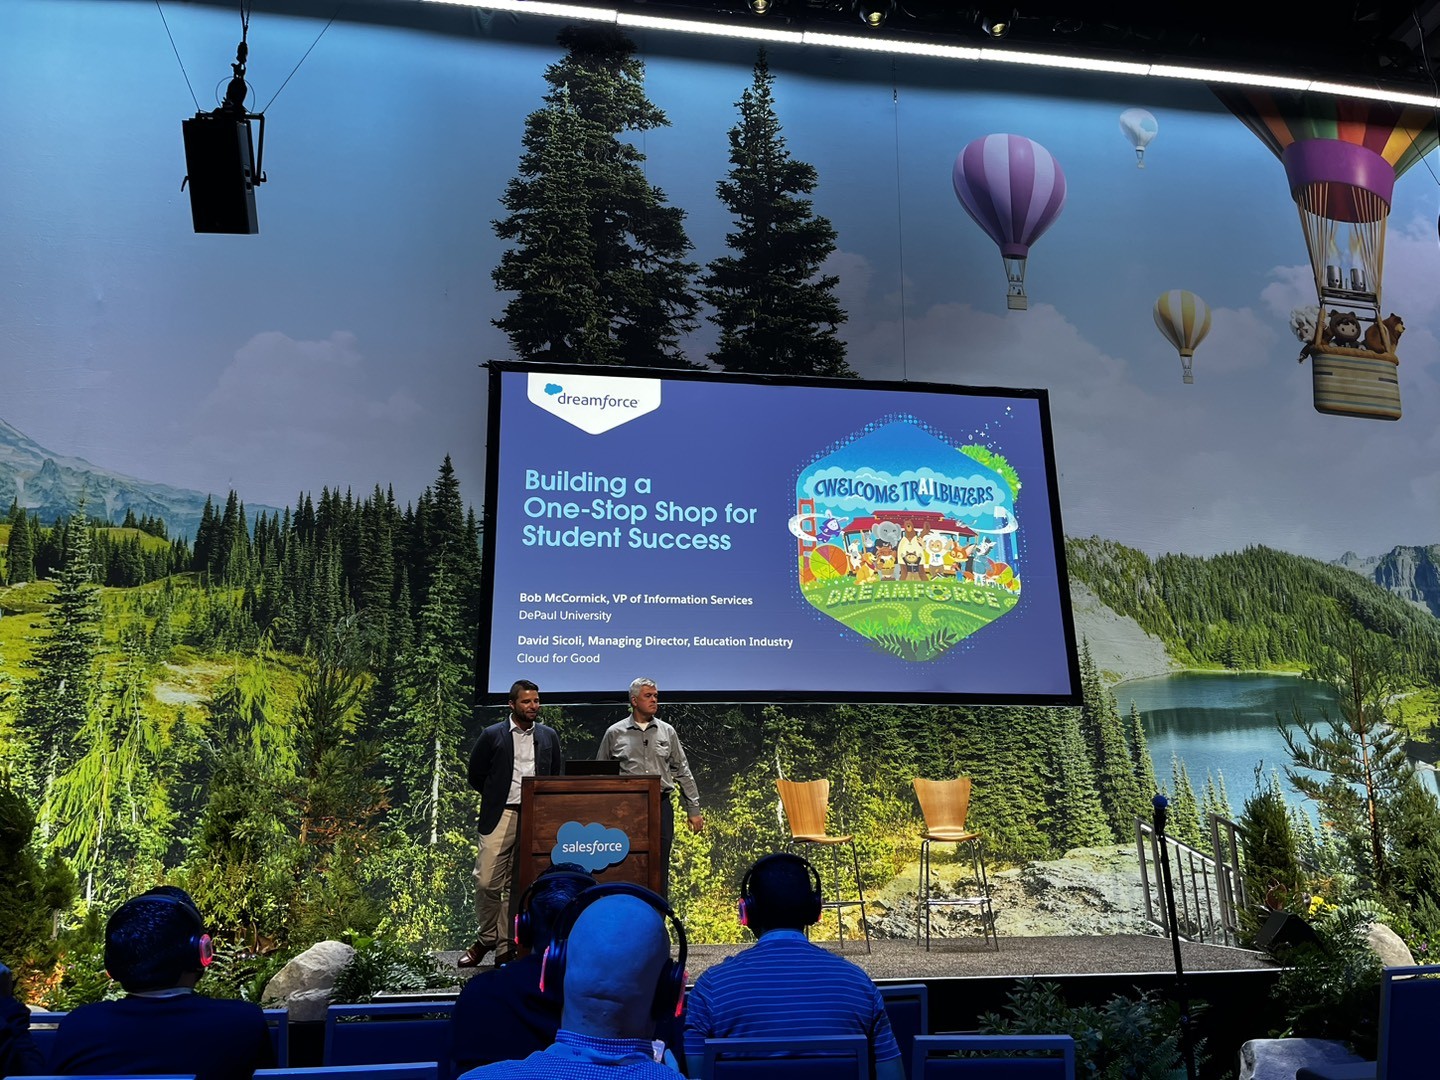 Goodie Dave Sicoli presents alongside Cloud for Good customer DePaul University on stage at Dreamforce 2023.  